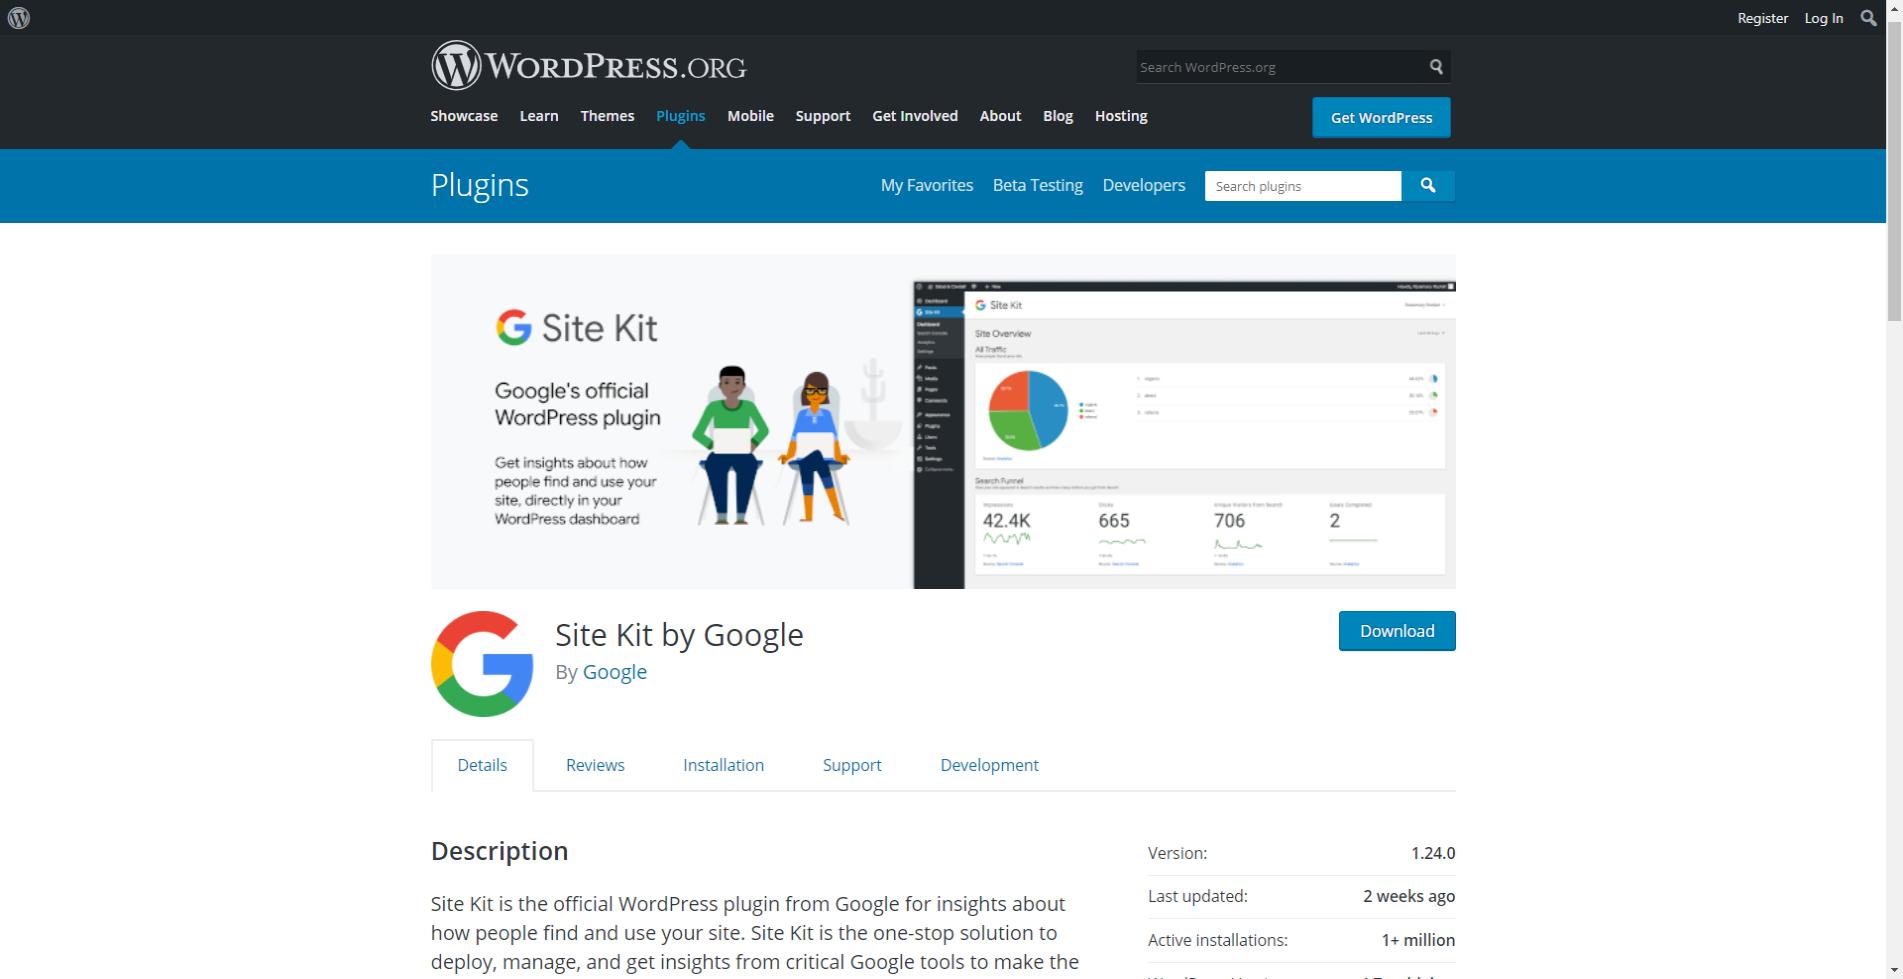 Site kit by Google plugin page